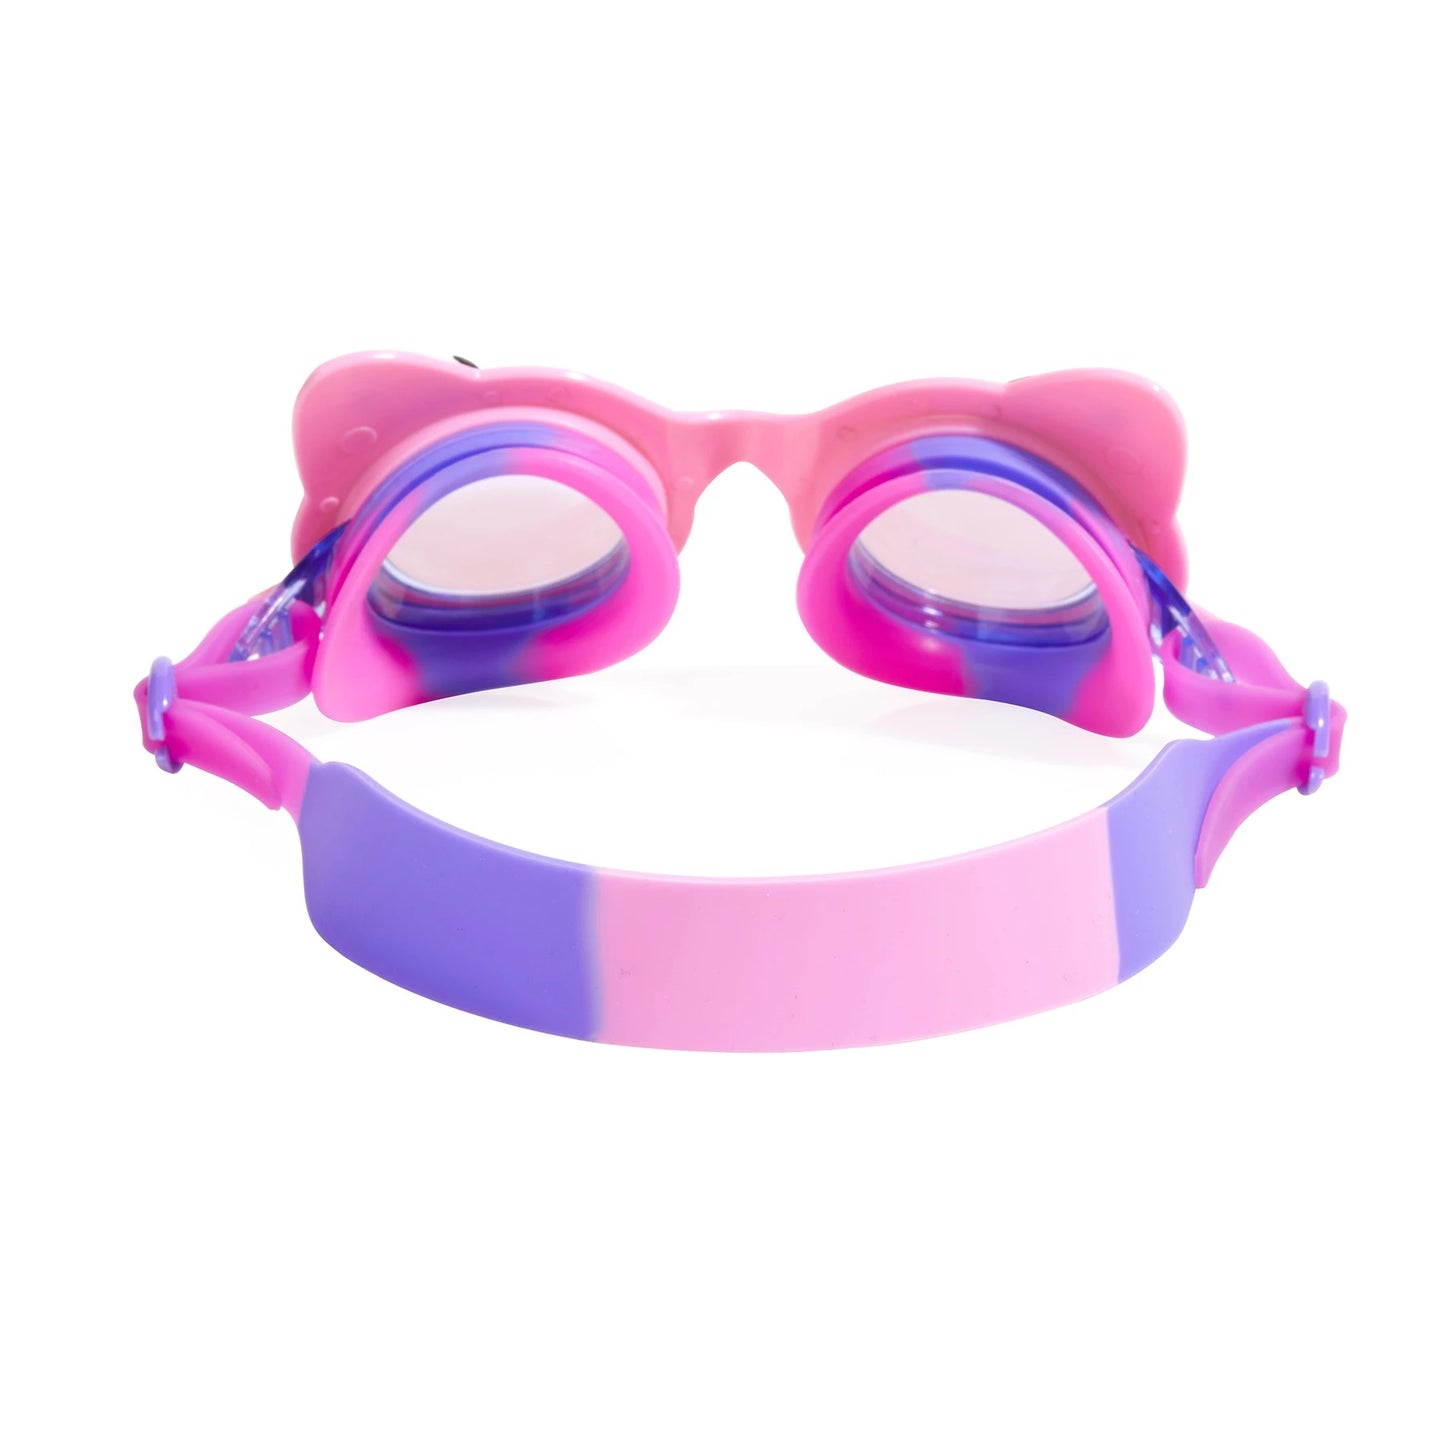 Bling2O Pawdry Hepburn Pink N Boots Swim Goggles for Kids